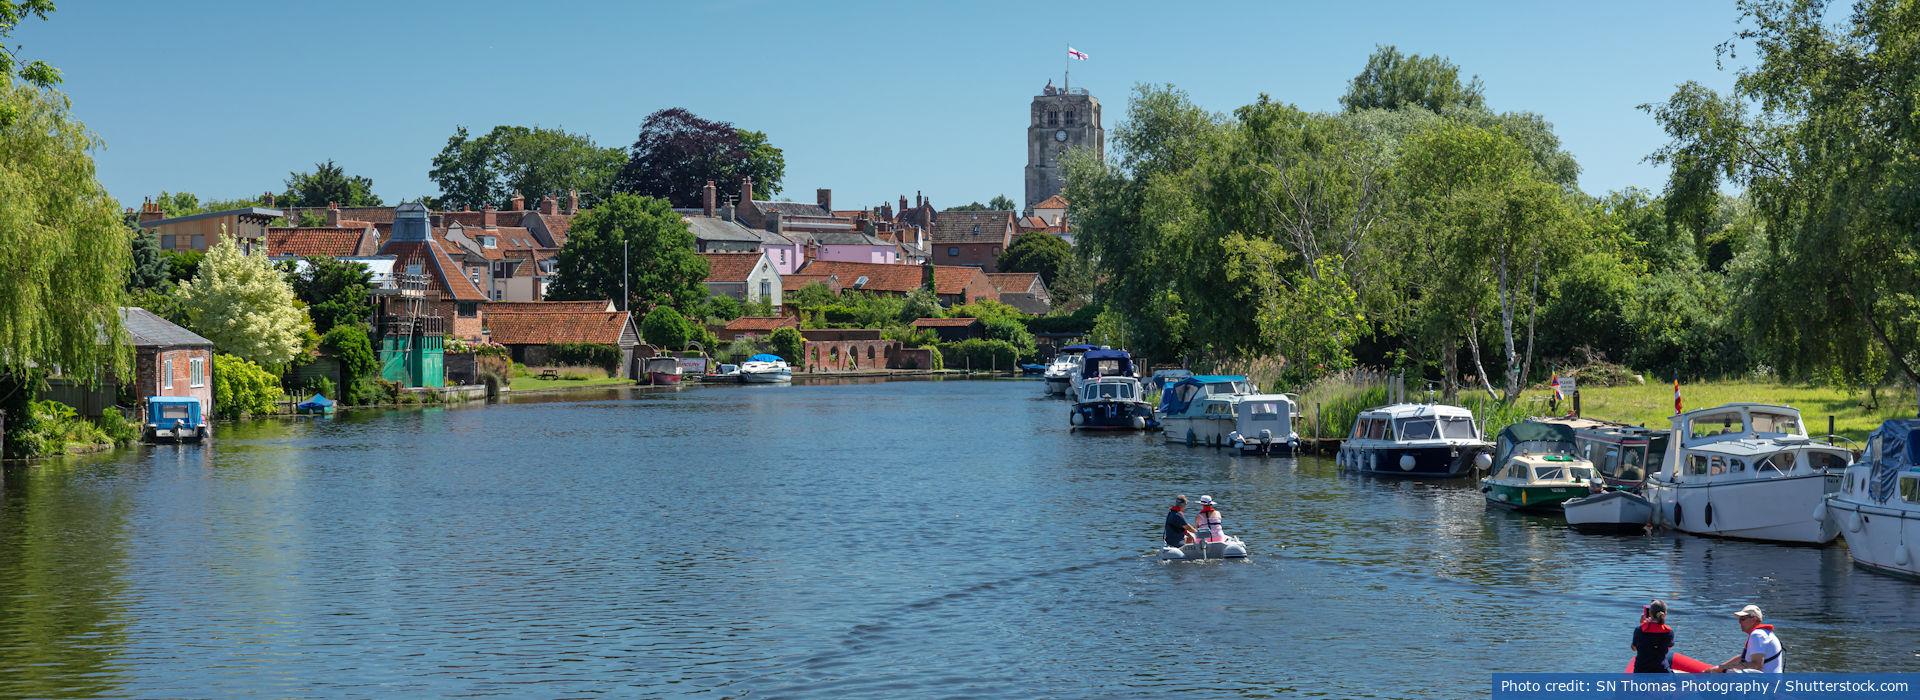 Beccles, Photo credit: SN Thomas Photography / Shutterstock.com